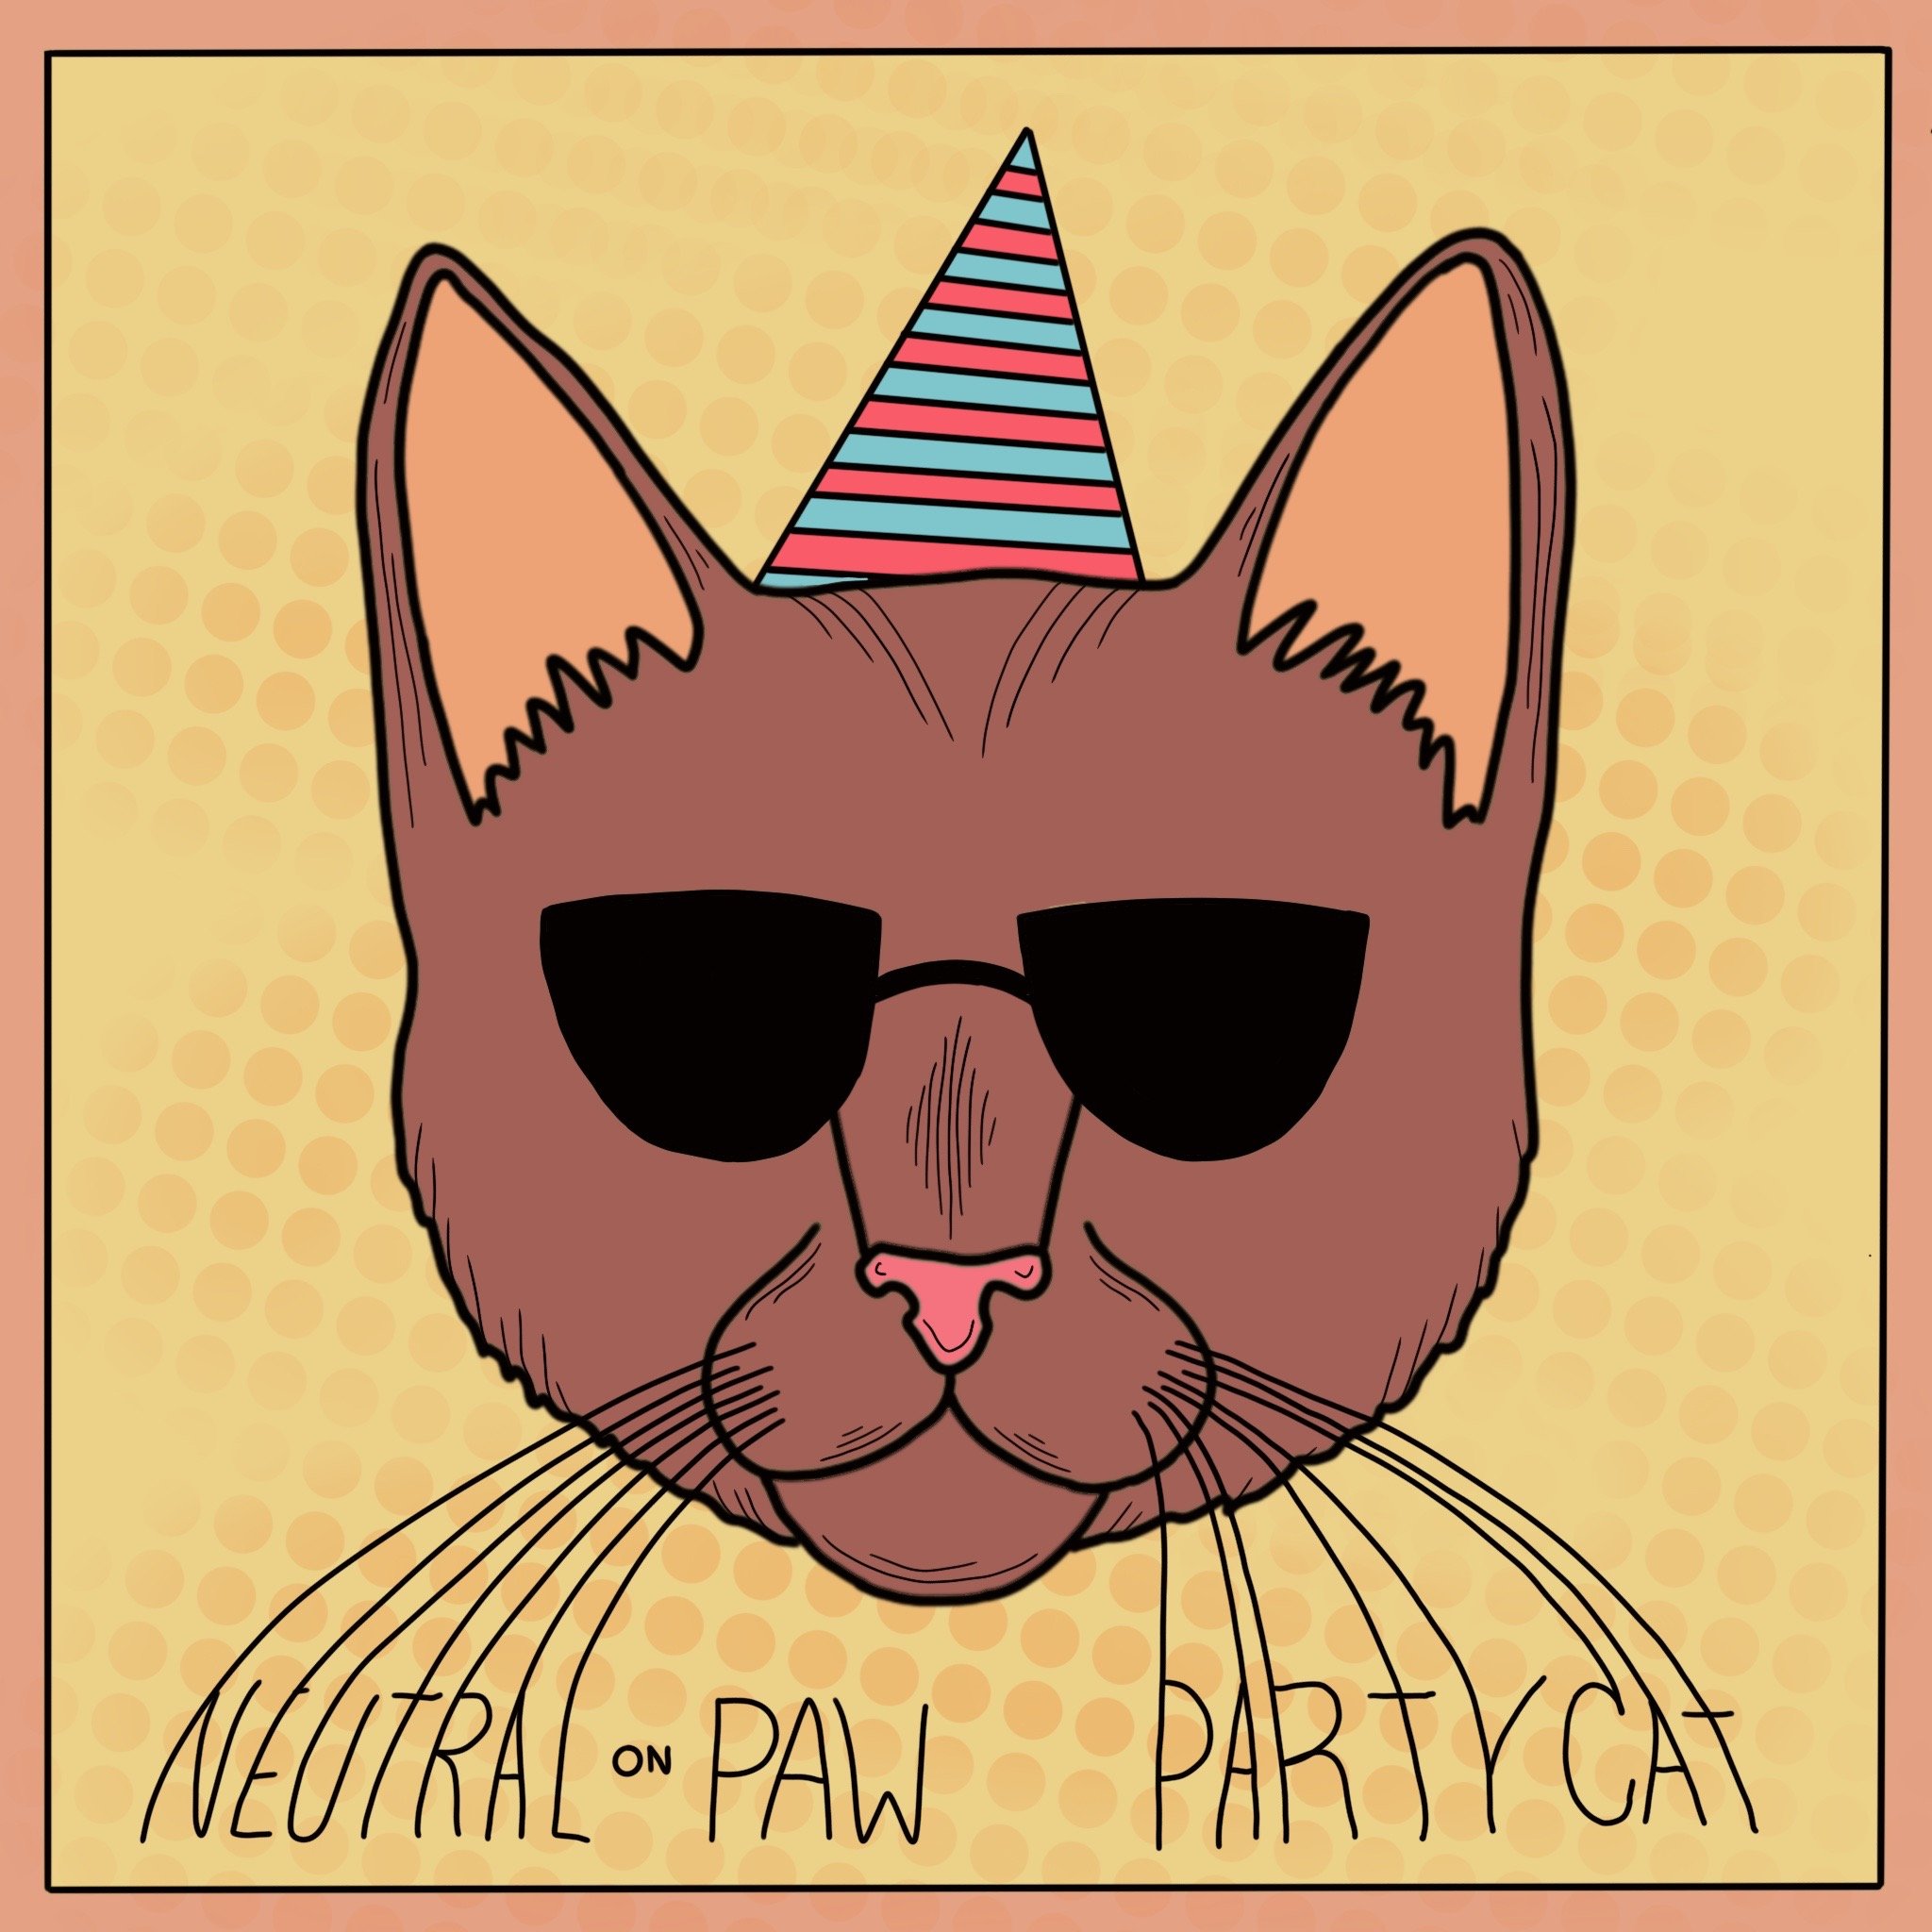 Neutral On Paul "Party Cat" Single Cover